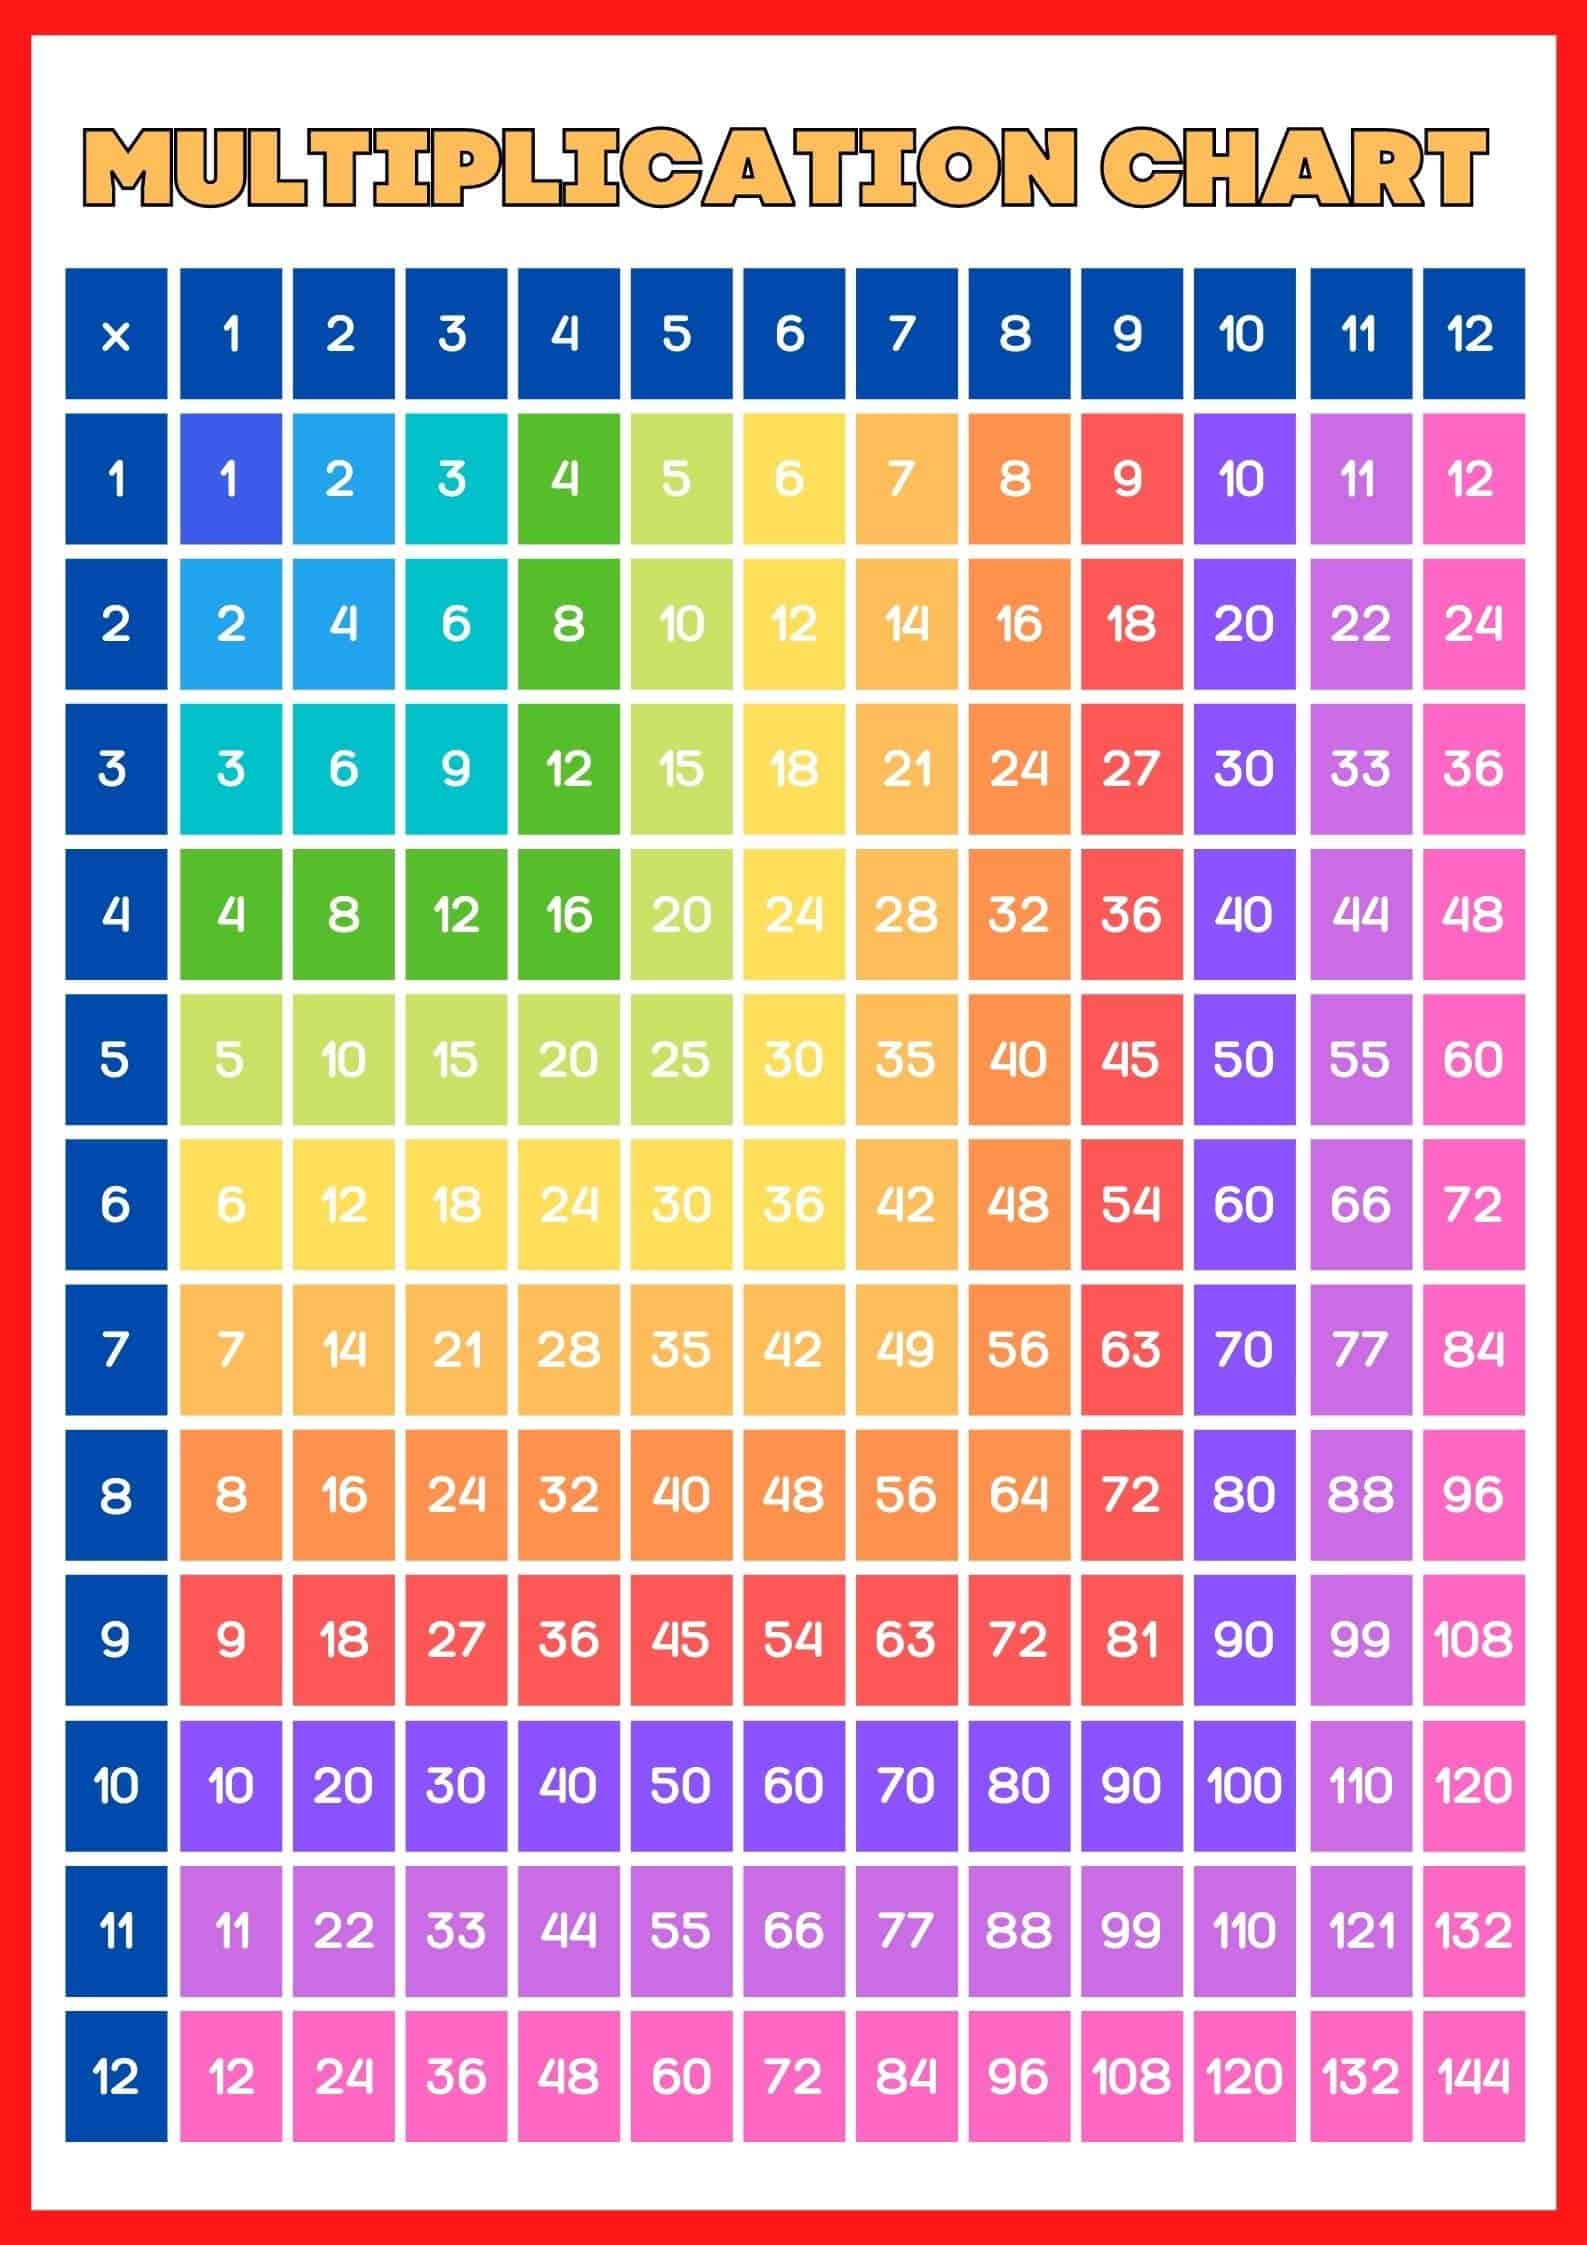 Multiplication Tables and Times Tables | Printable Charts | Blank and Completed